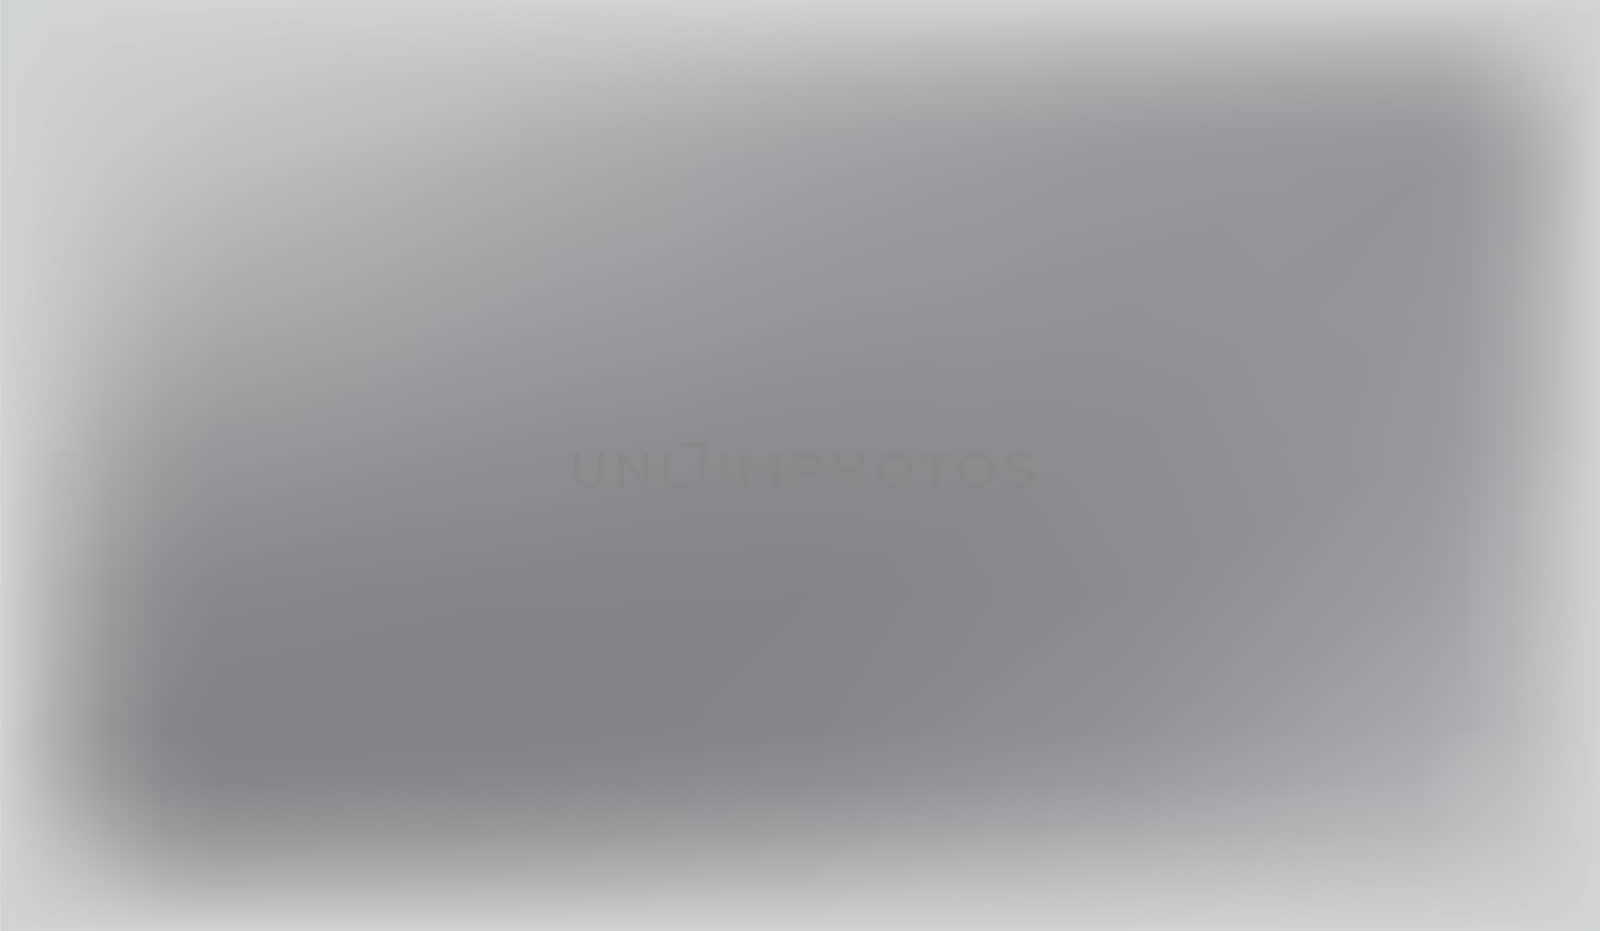 abstract gray background. light gray gradient abstract background.  